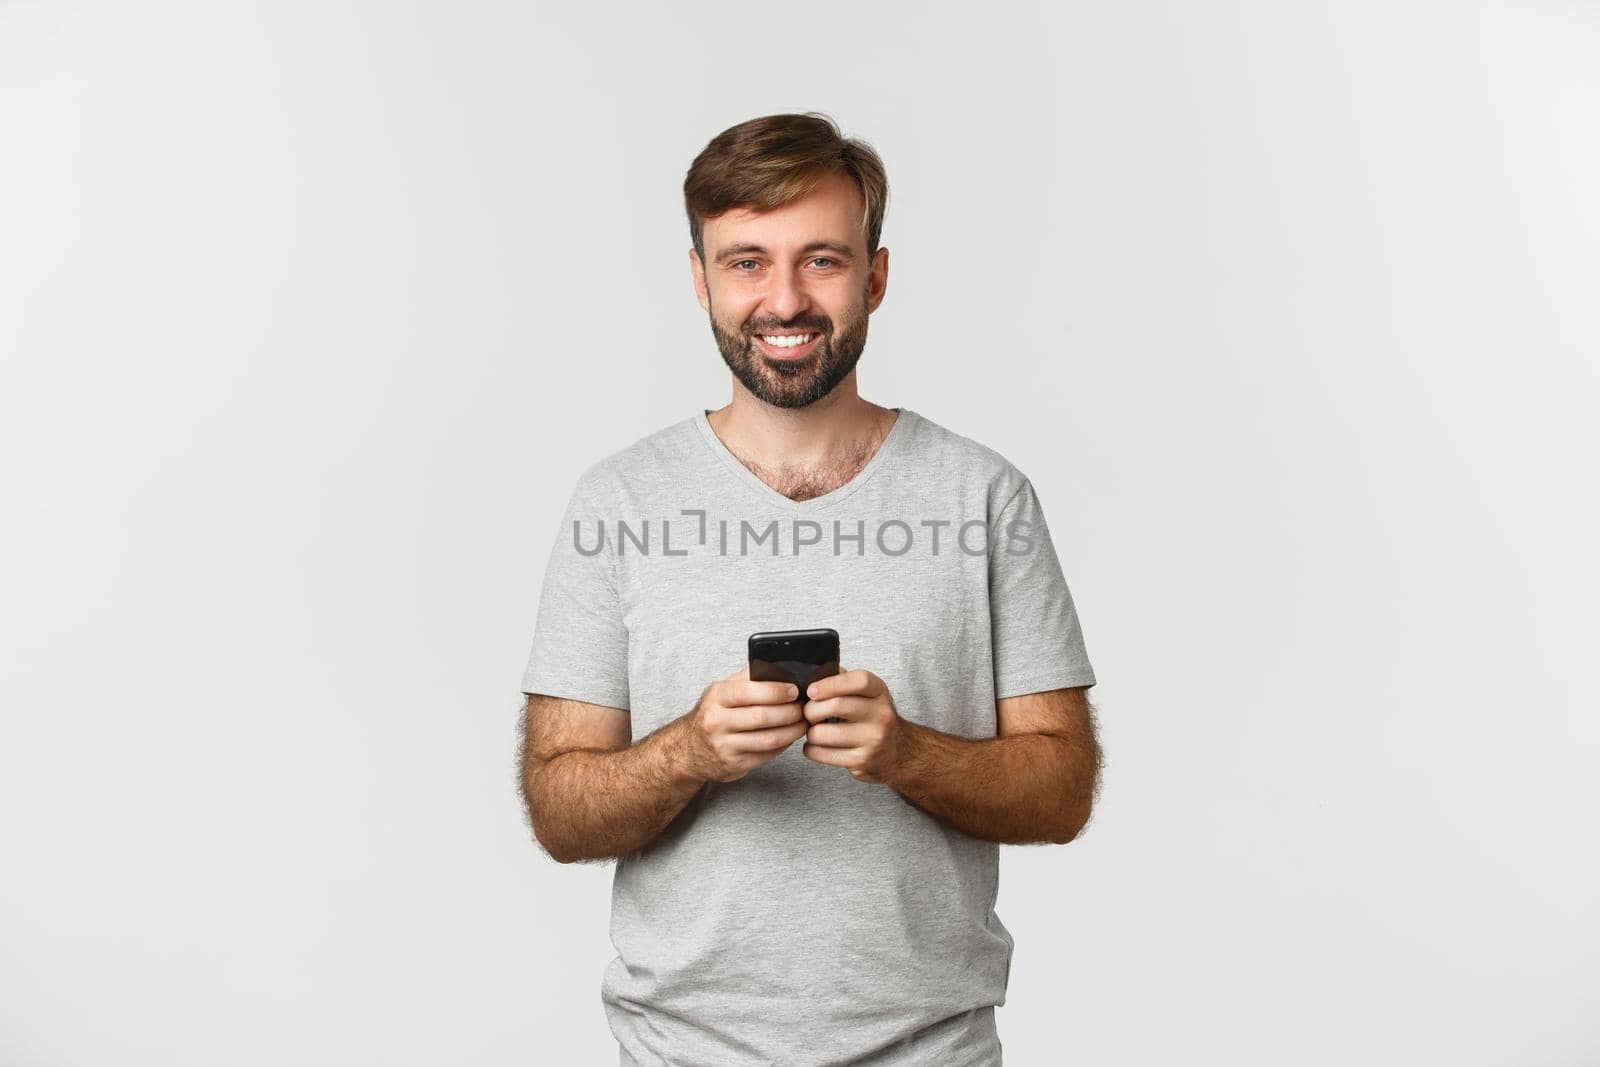 Portrait of happy smiling man with beard, wearing t-shirt, using mobile phone, standing over white background.